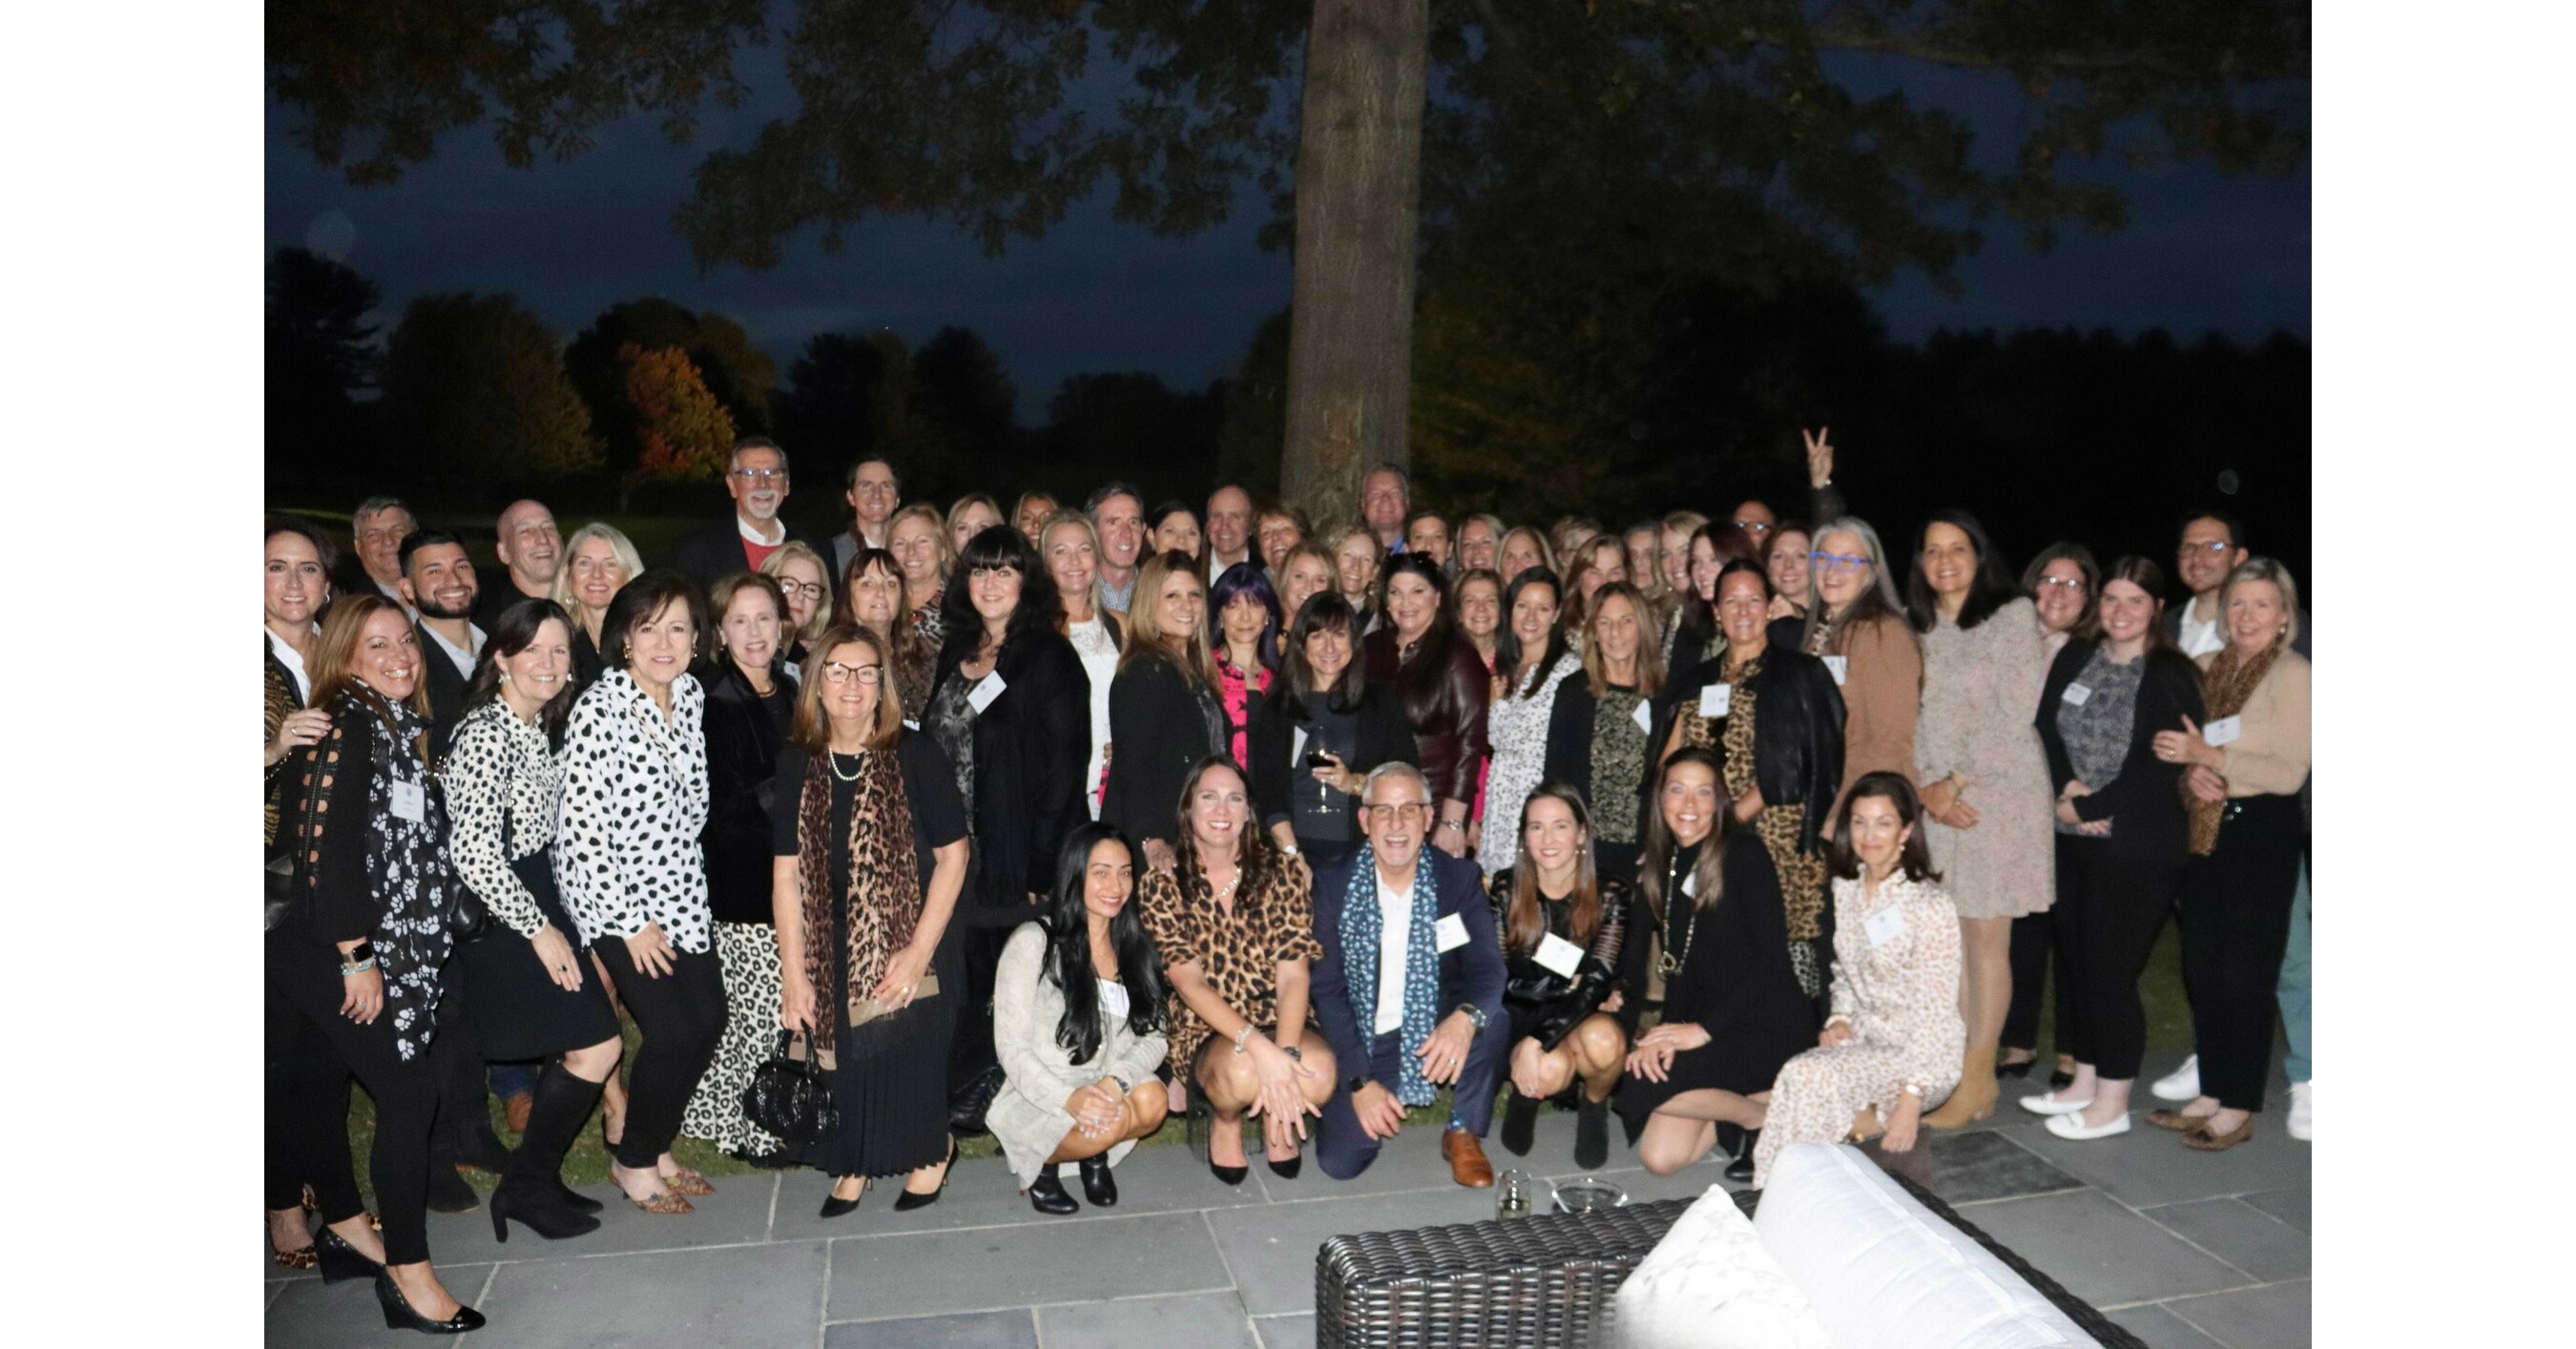 William Pitt Sotheby’s International Realty’s Co-President Hosting Animal-Themed Networking Event to Support Connecticut Humane Society